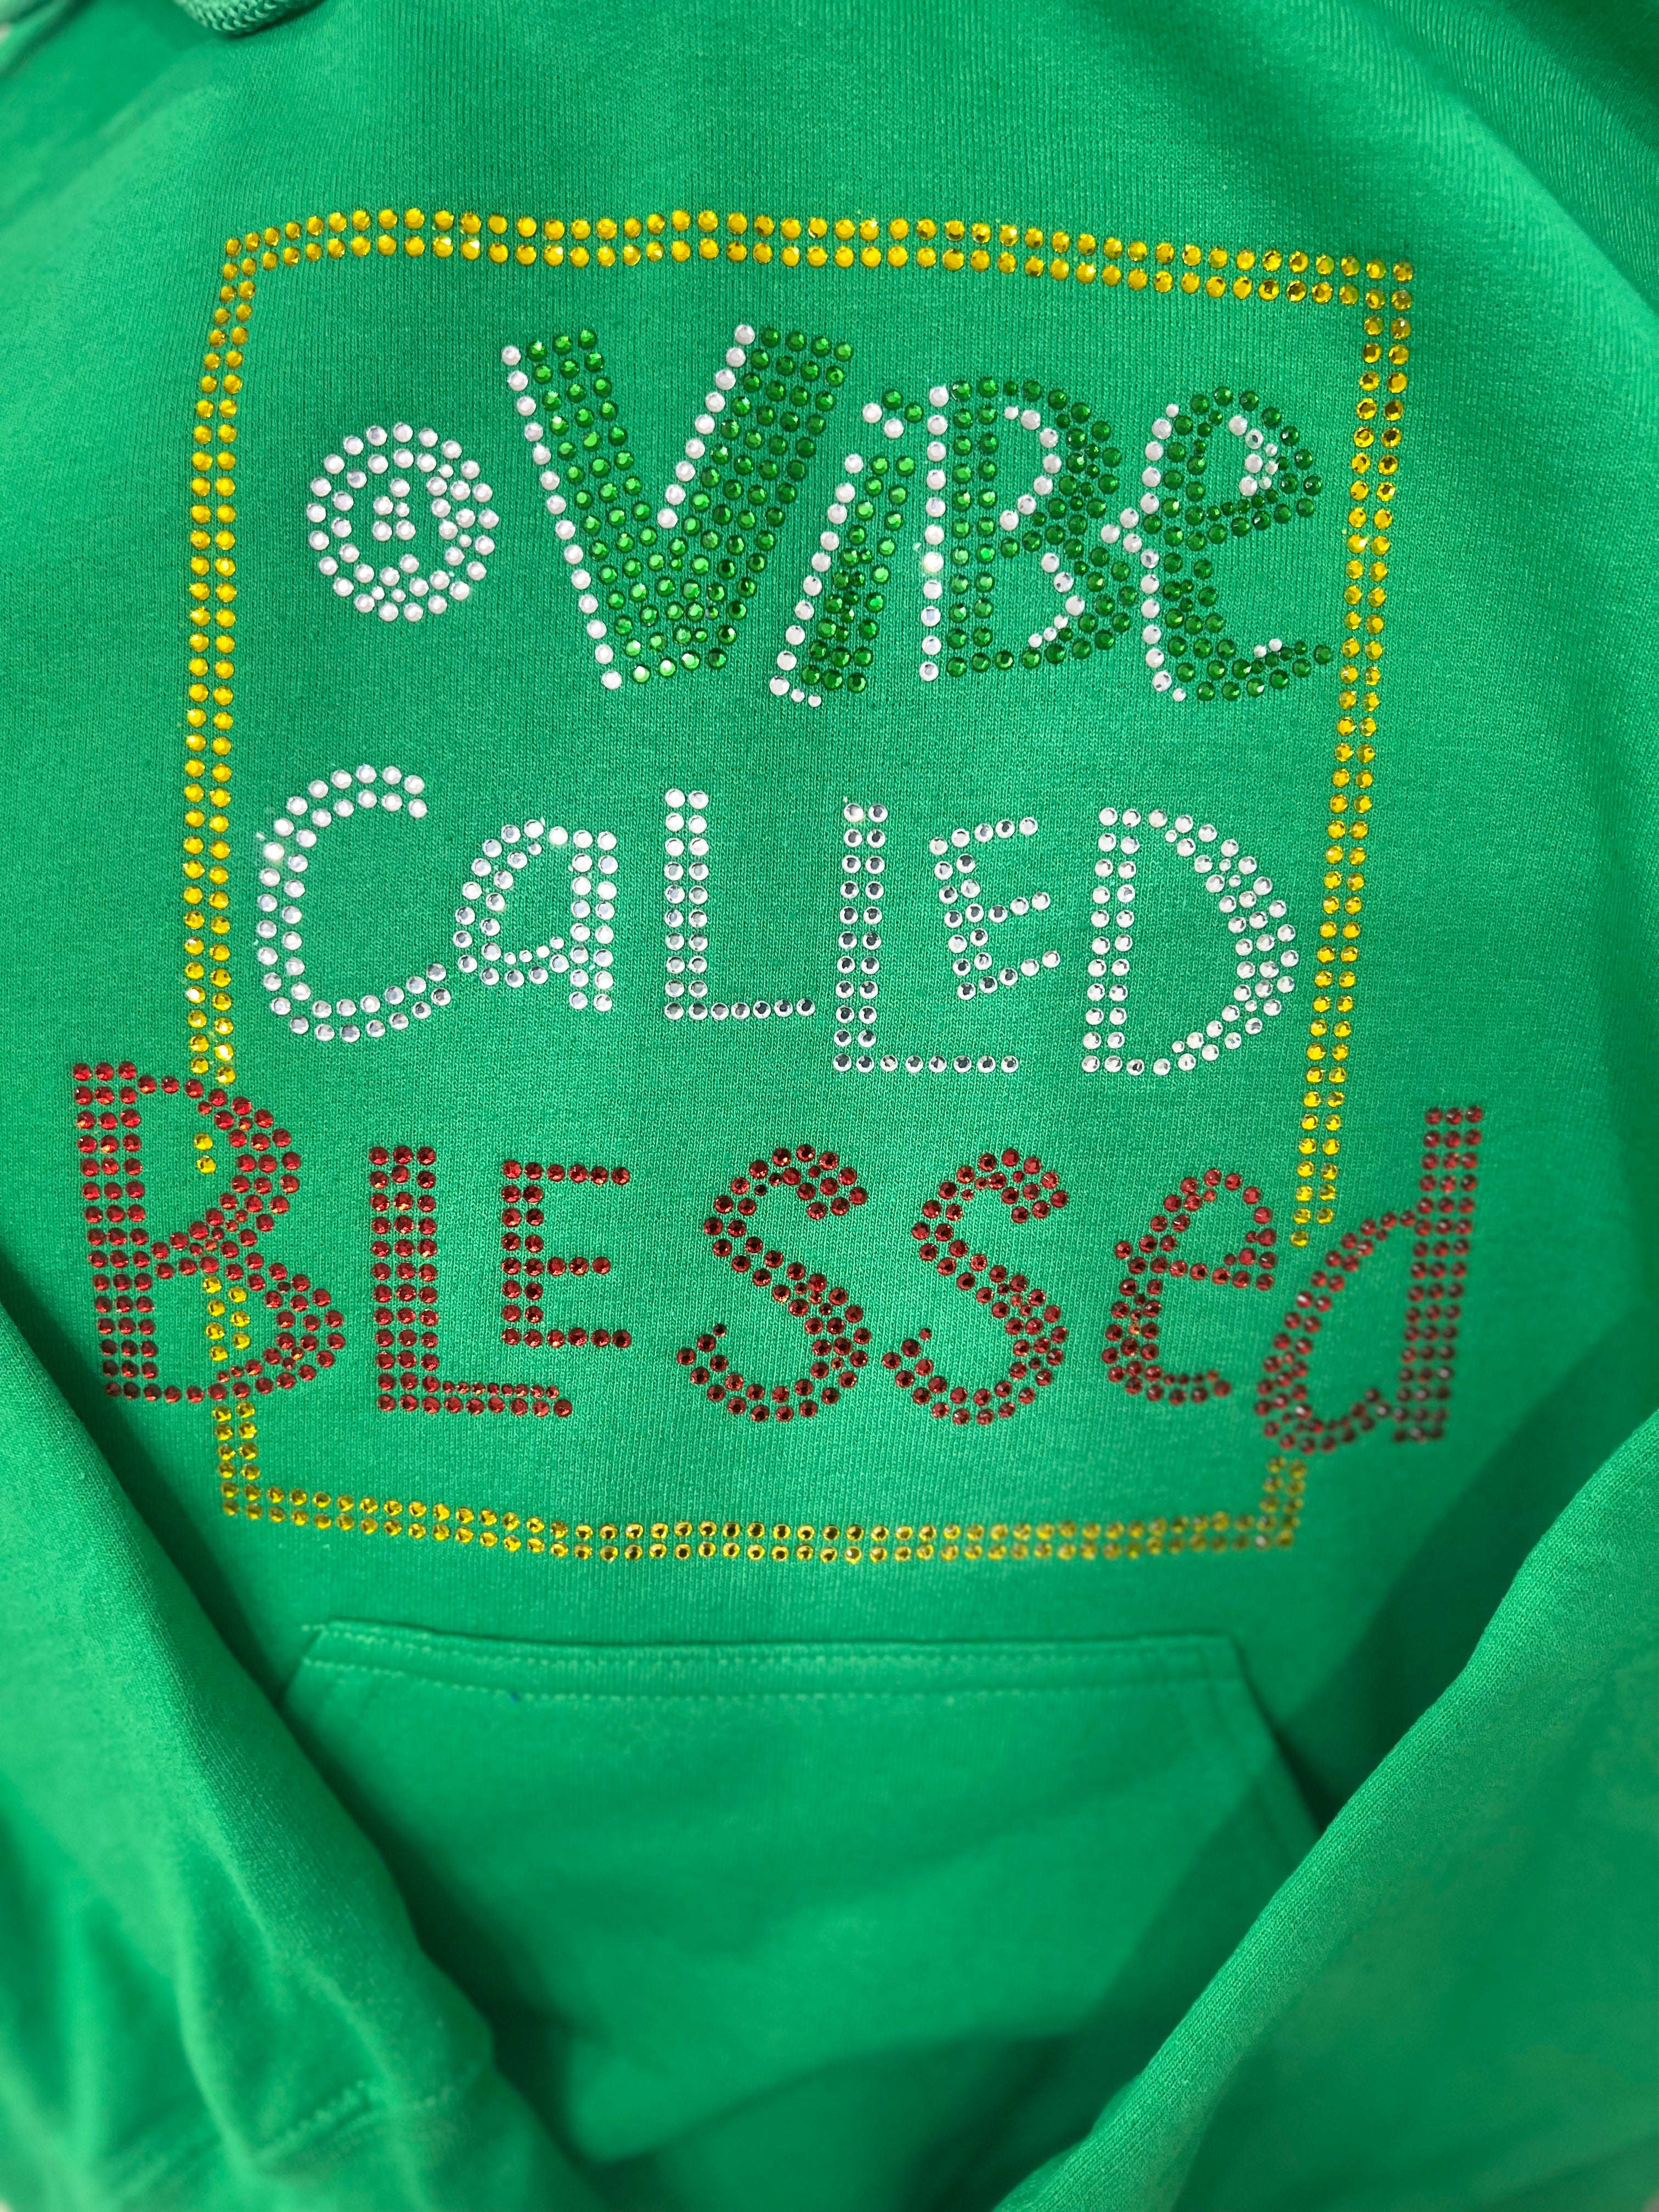 A Vibe Called BLESSED!